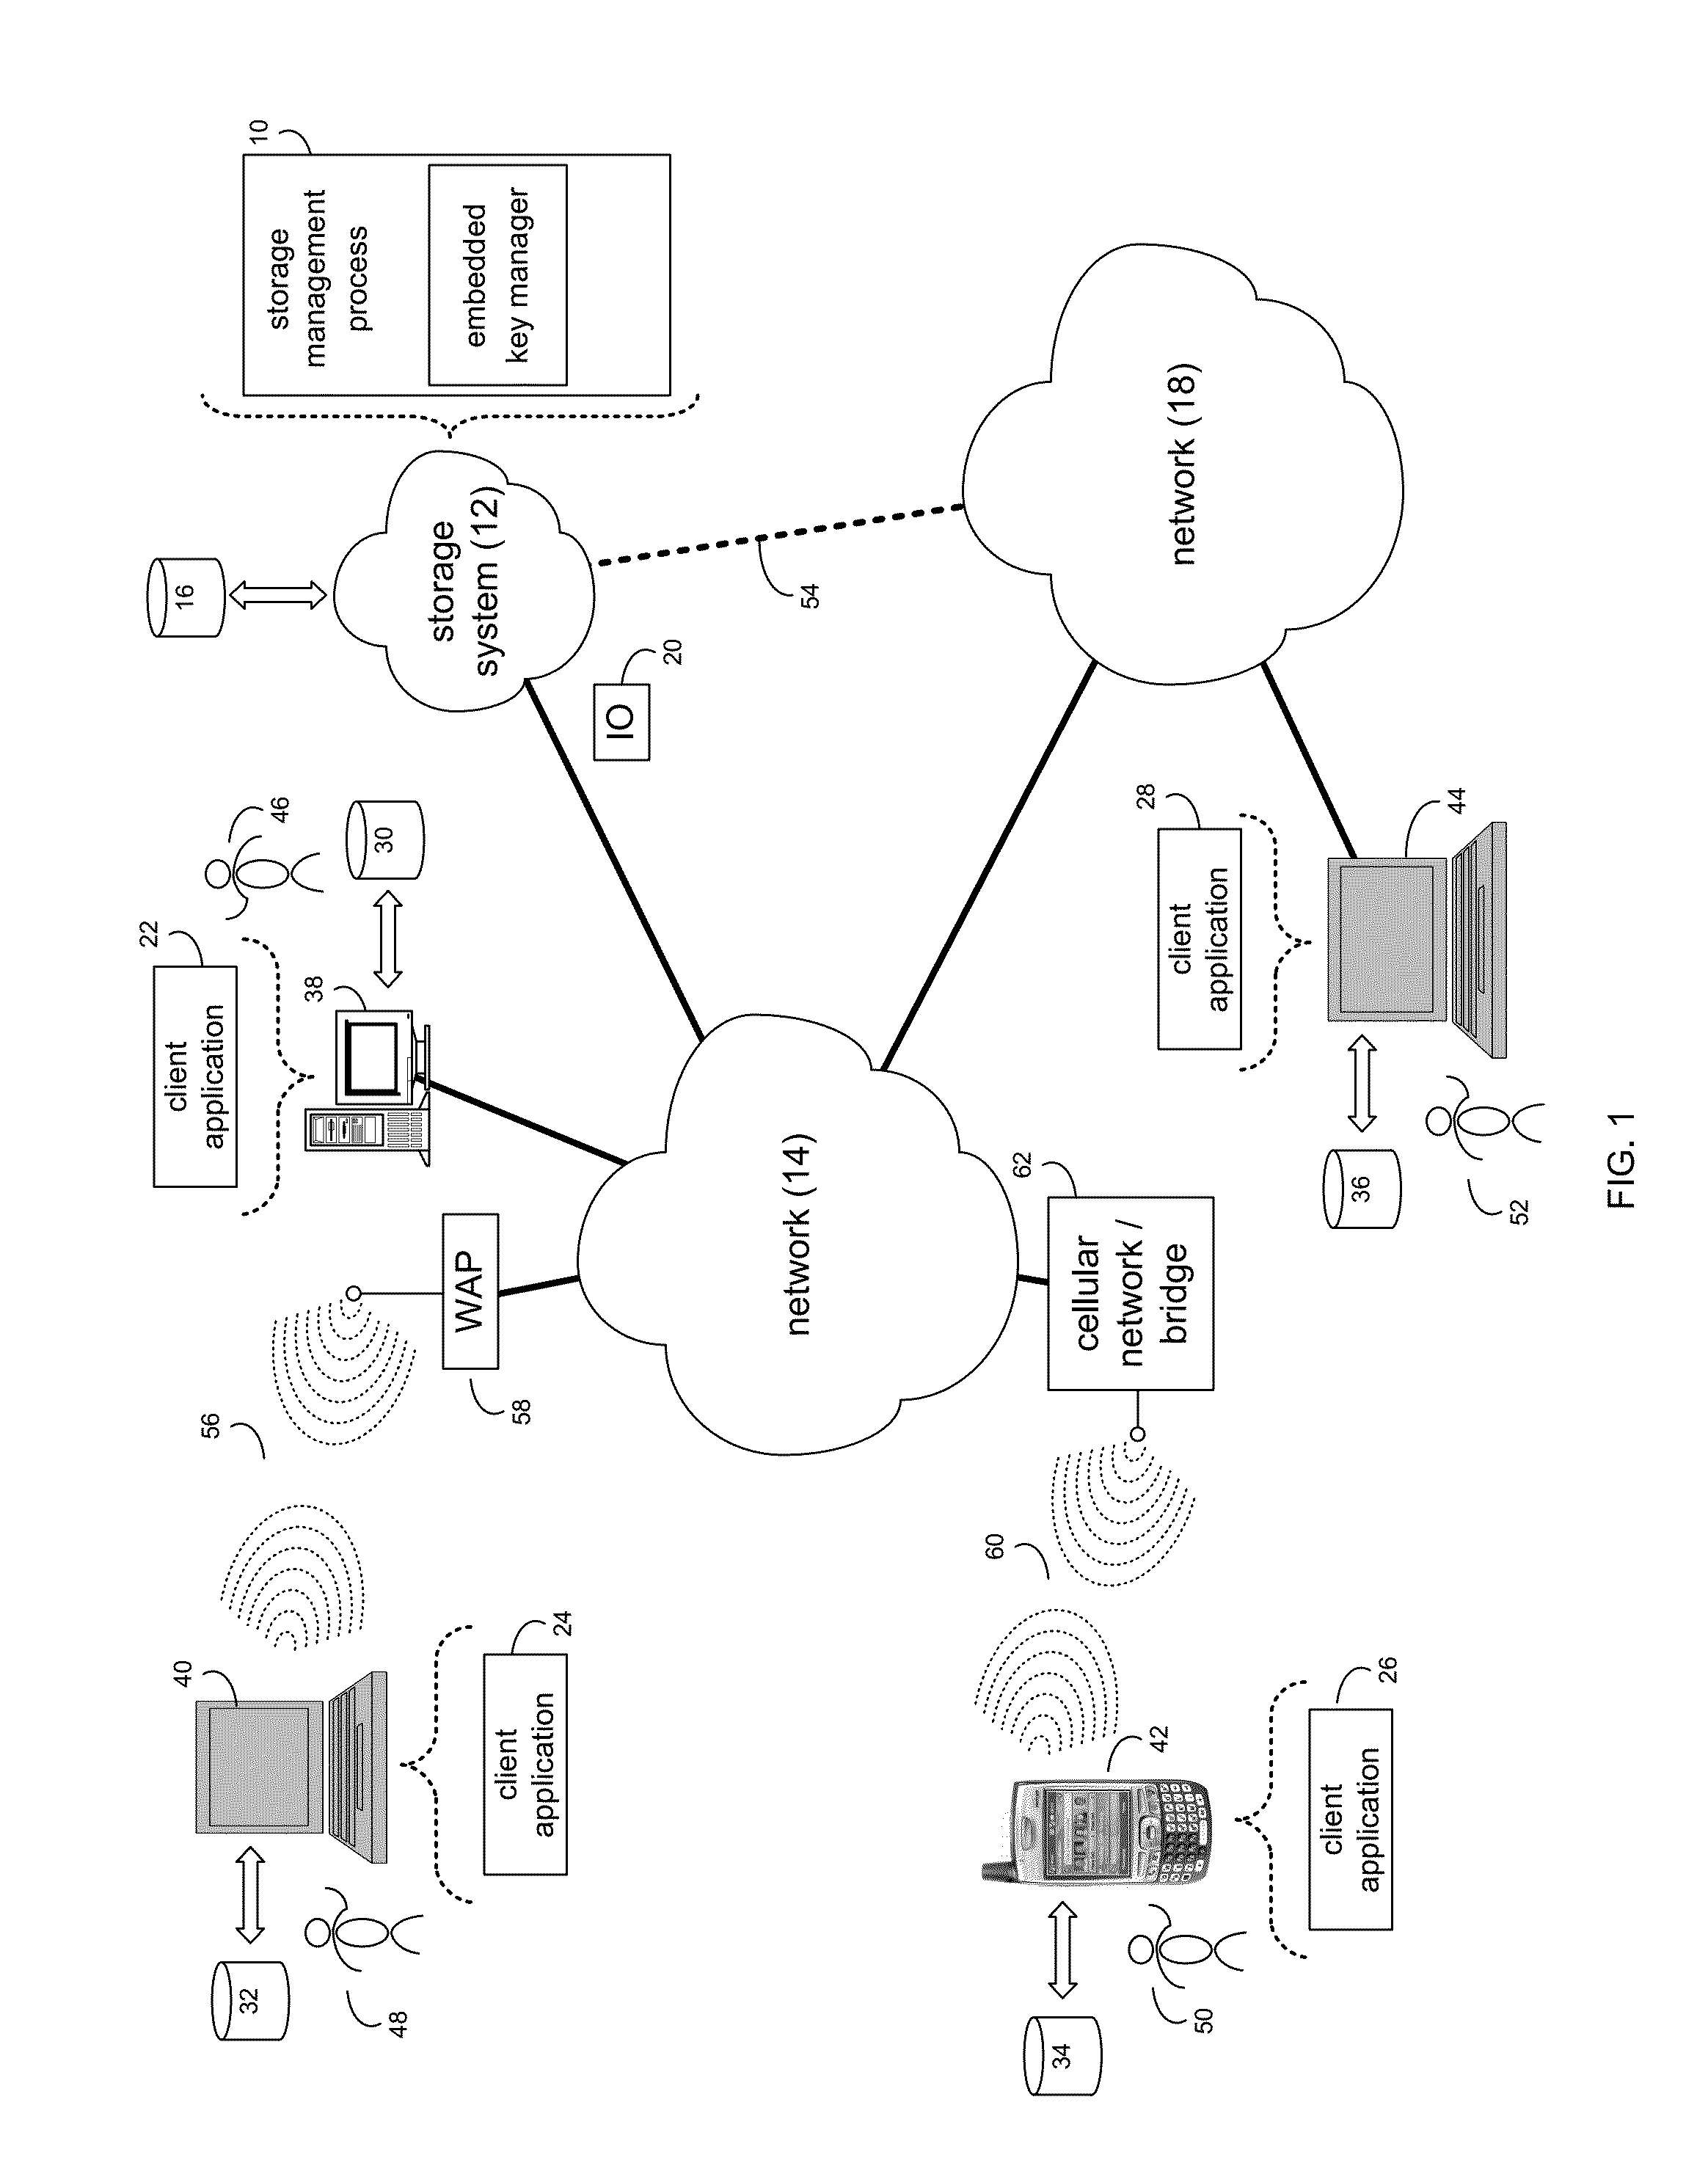 Securely and redundantly storing encryption credentials system and method